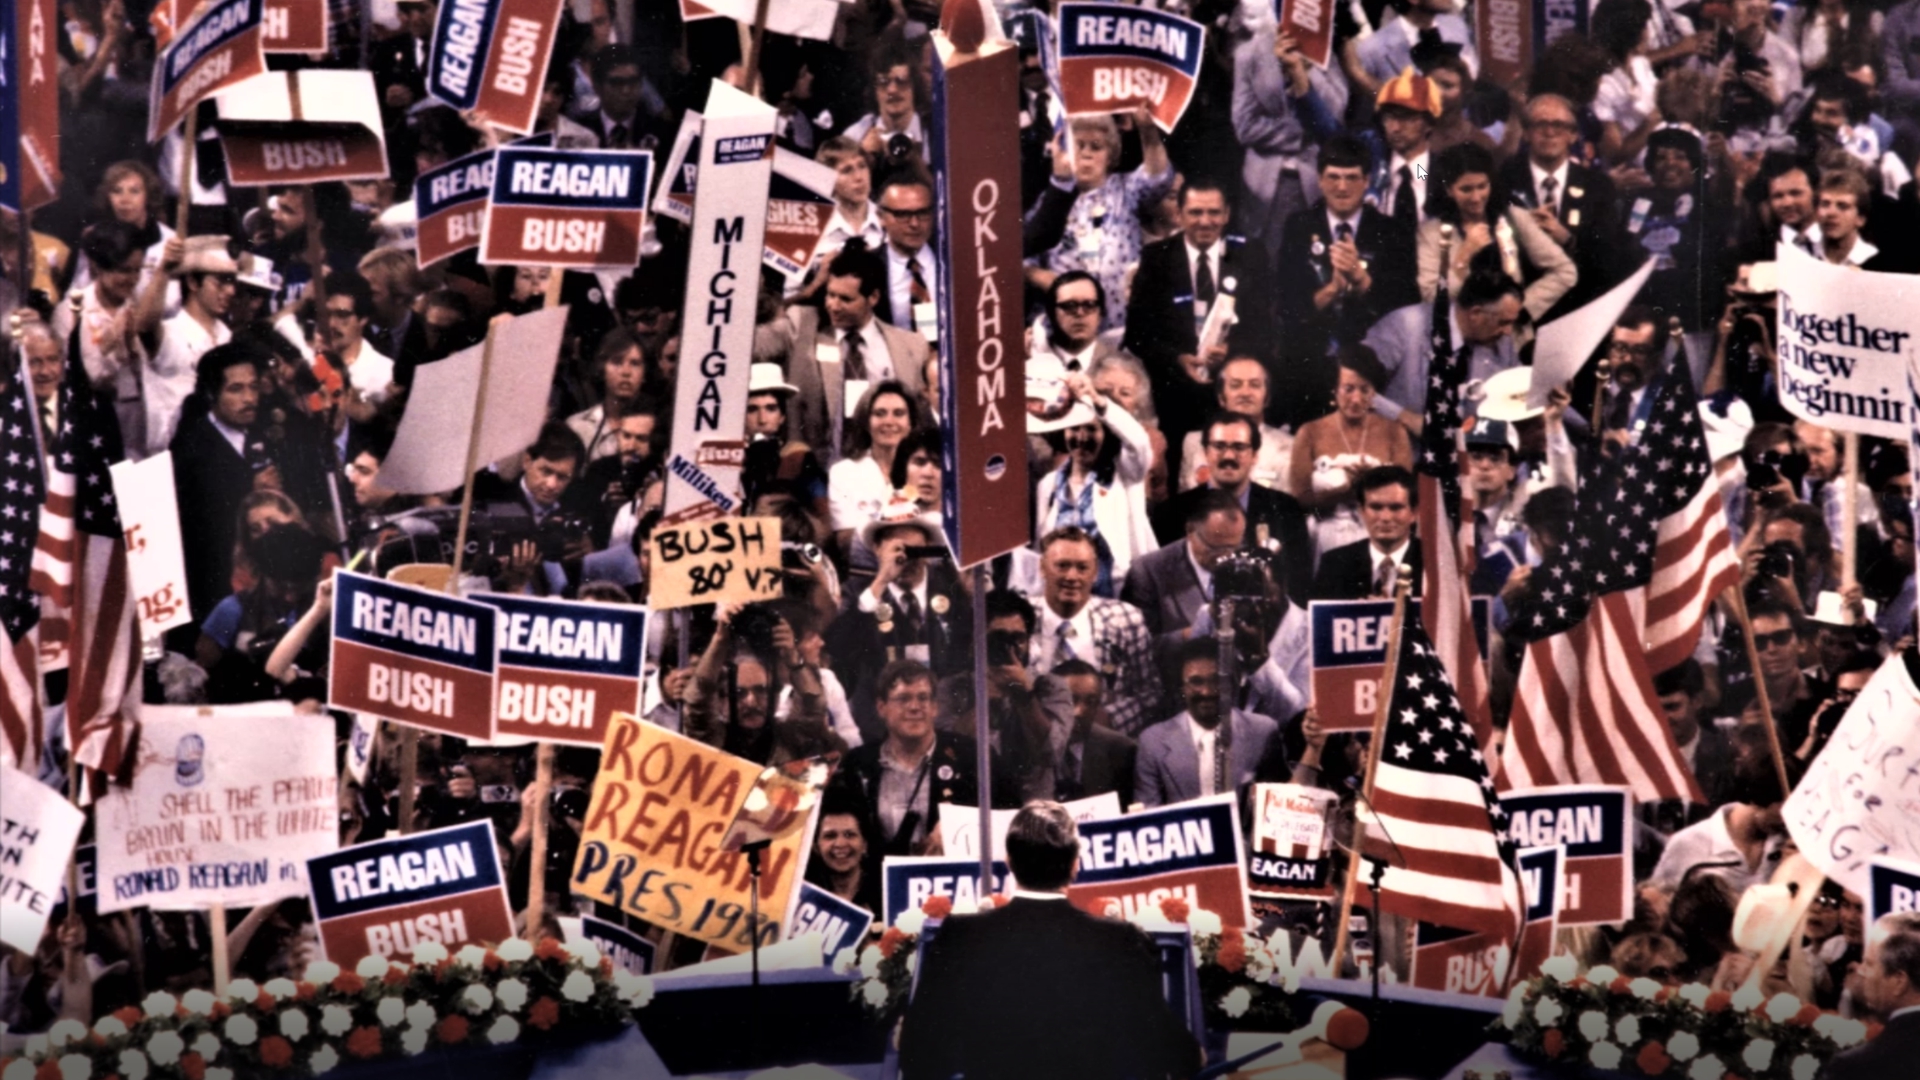 Republican National Convention 1980